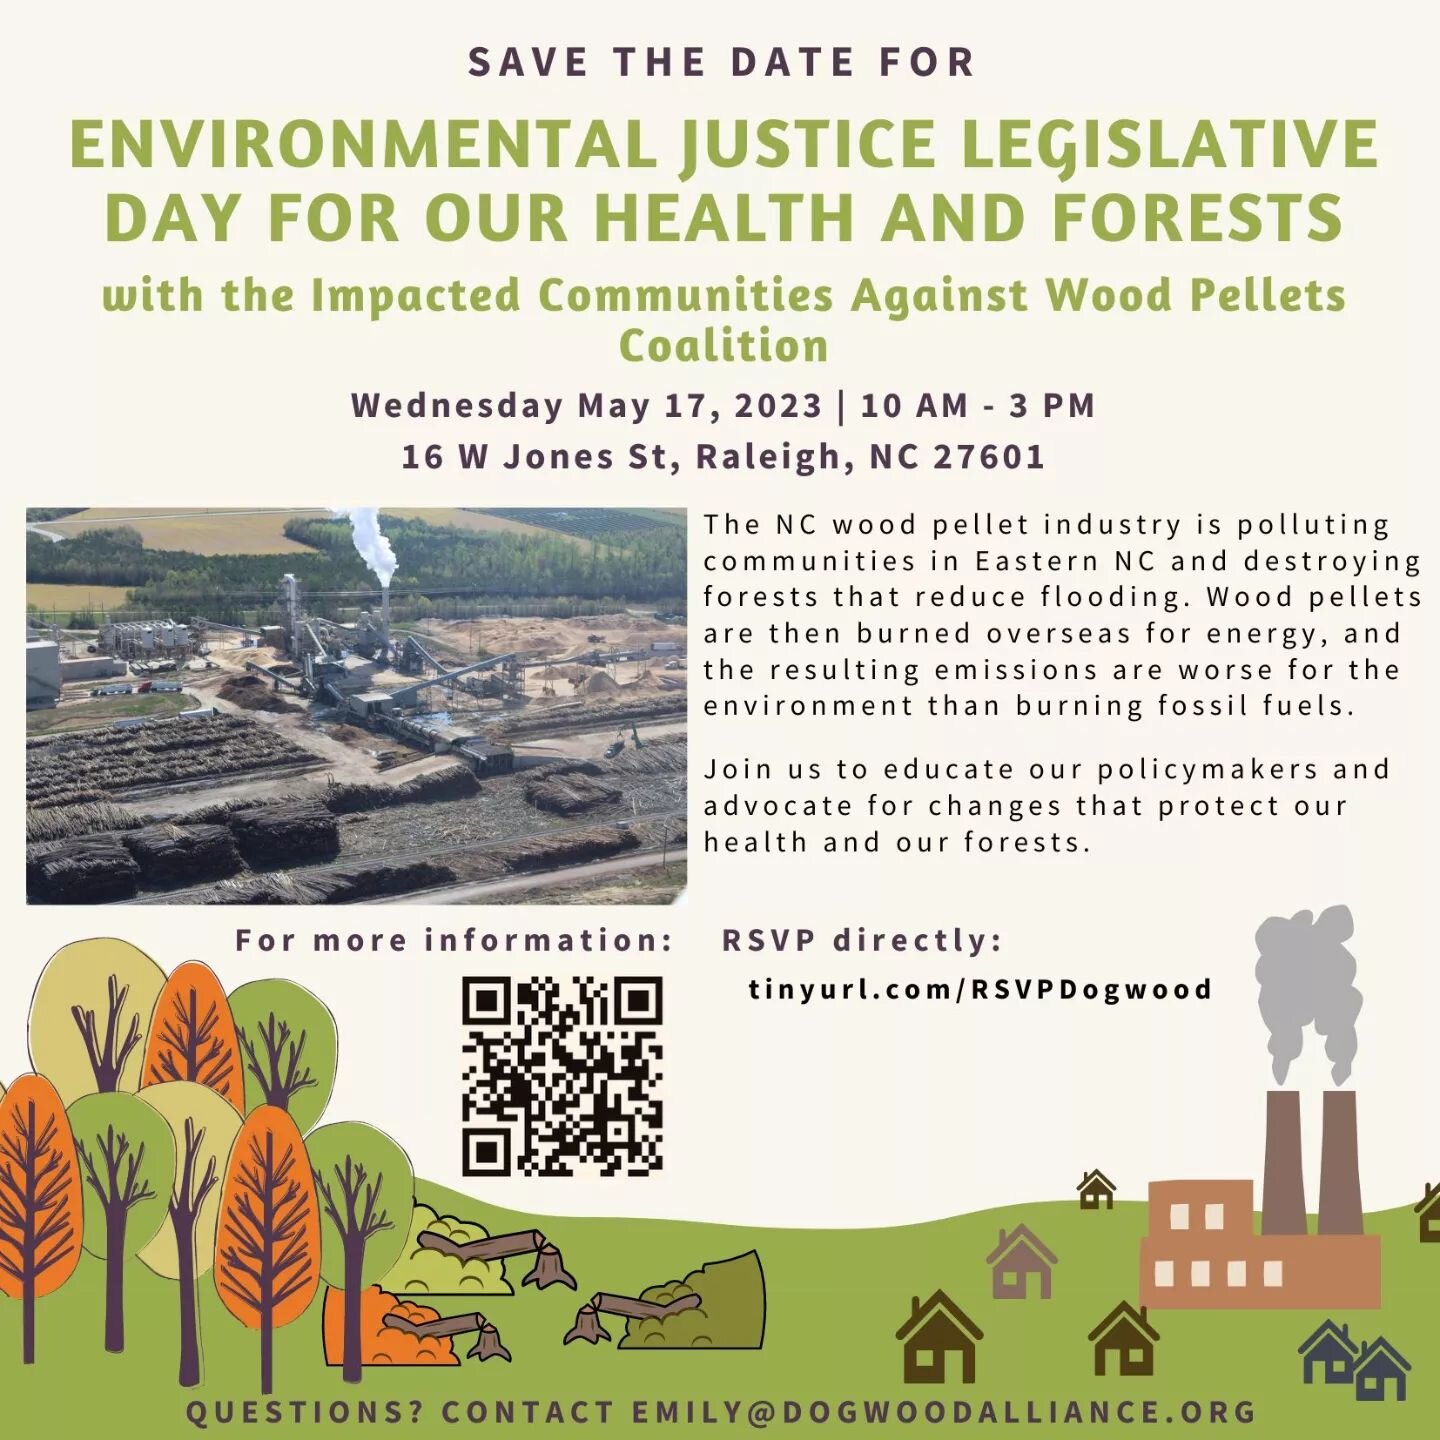 Join our partners over at the @dogwoodalliance on May 17th in Raleigh for a legislative day of action! 

Check out our link in bio to sign up and learn more!

#northcarolina #dogwood #legislation #dayofaction #environmentaljustice